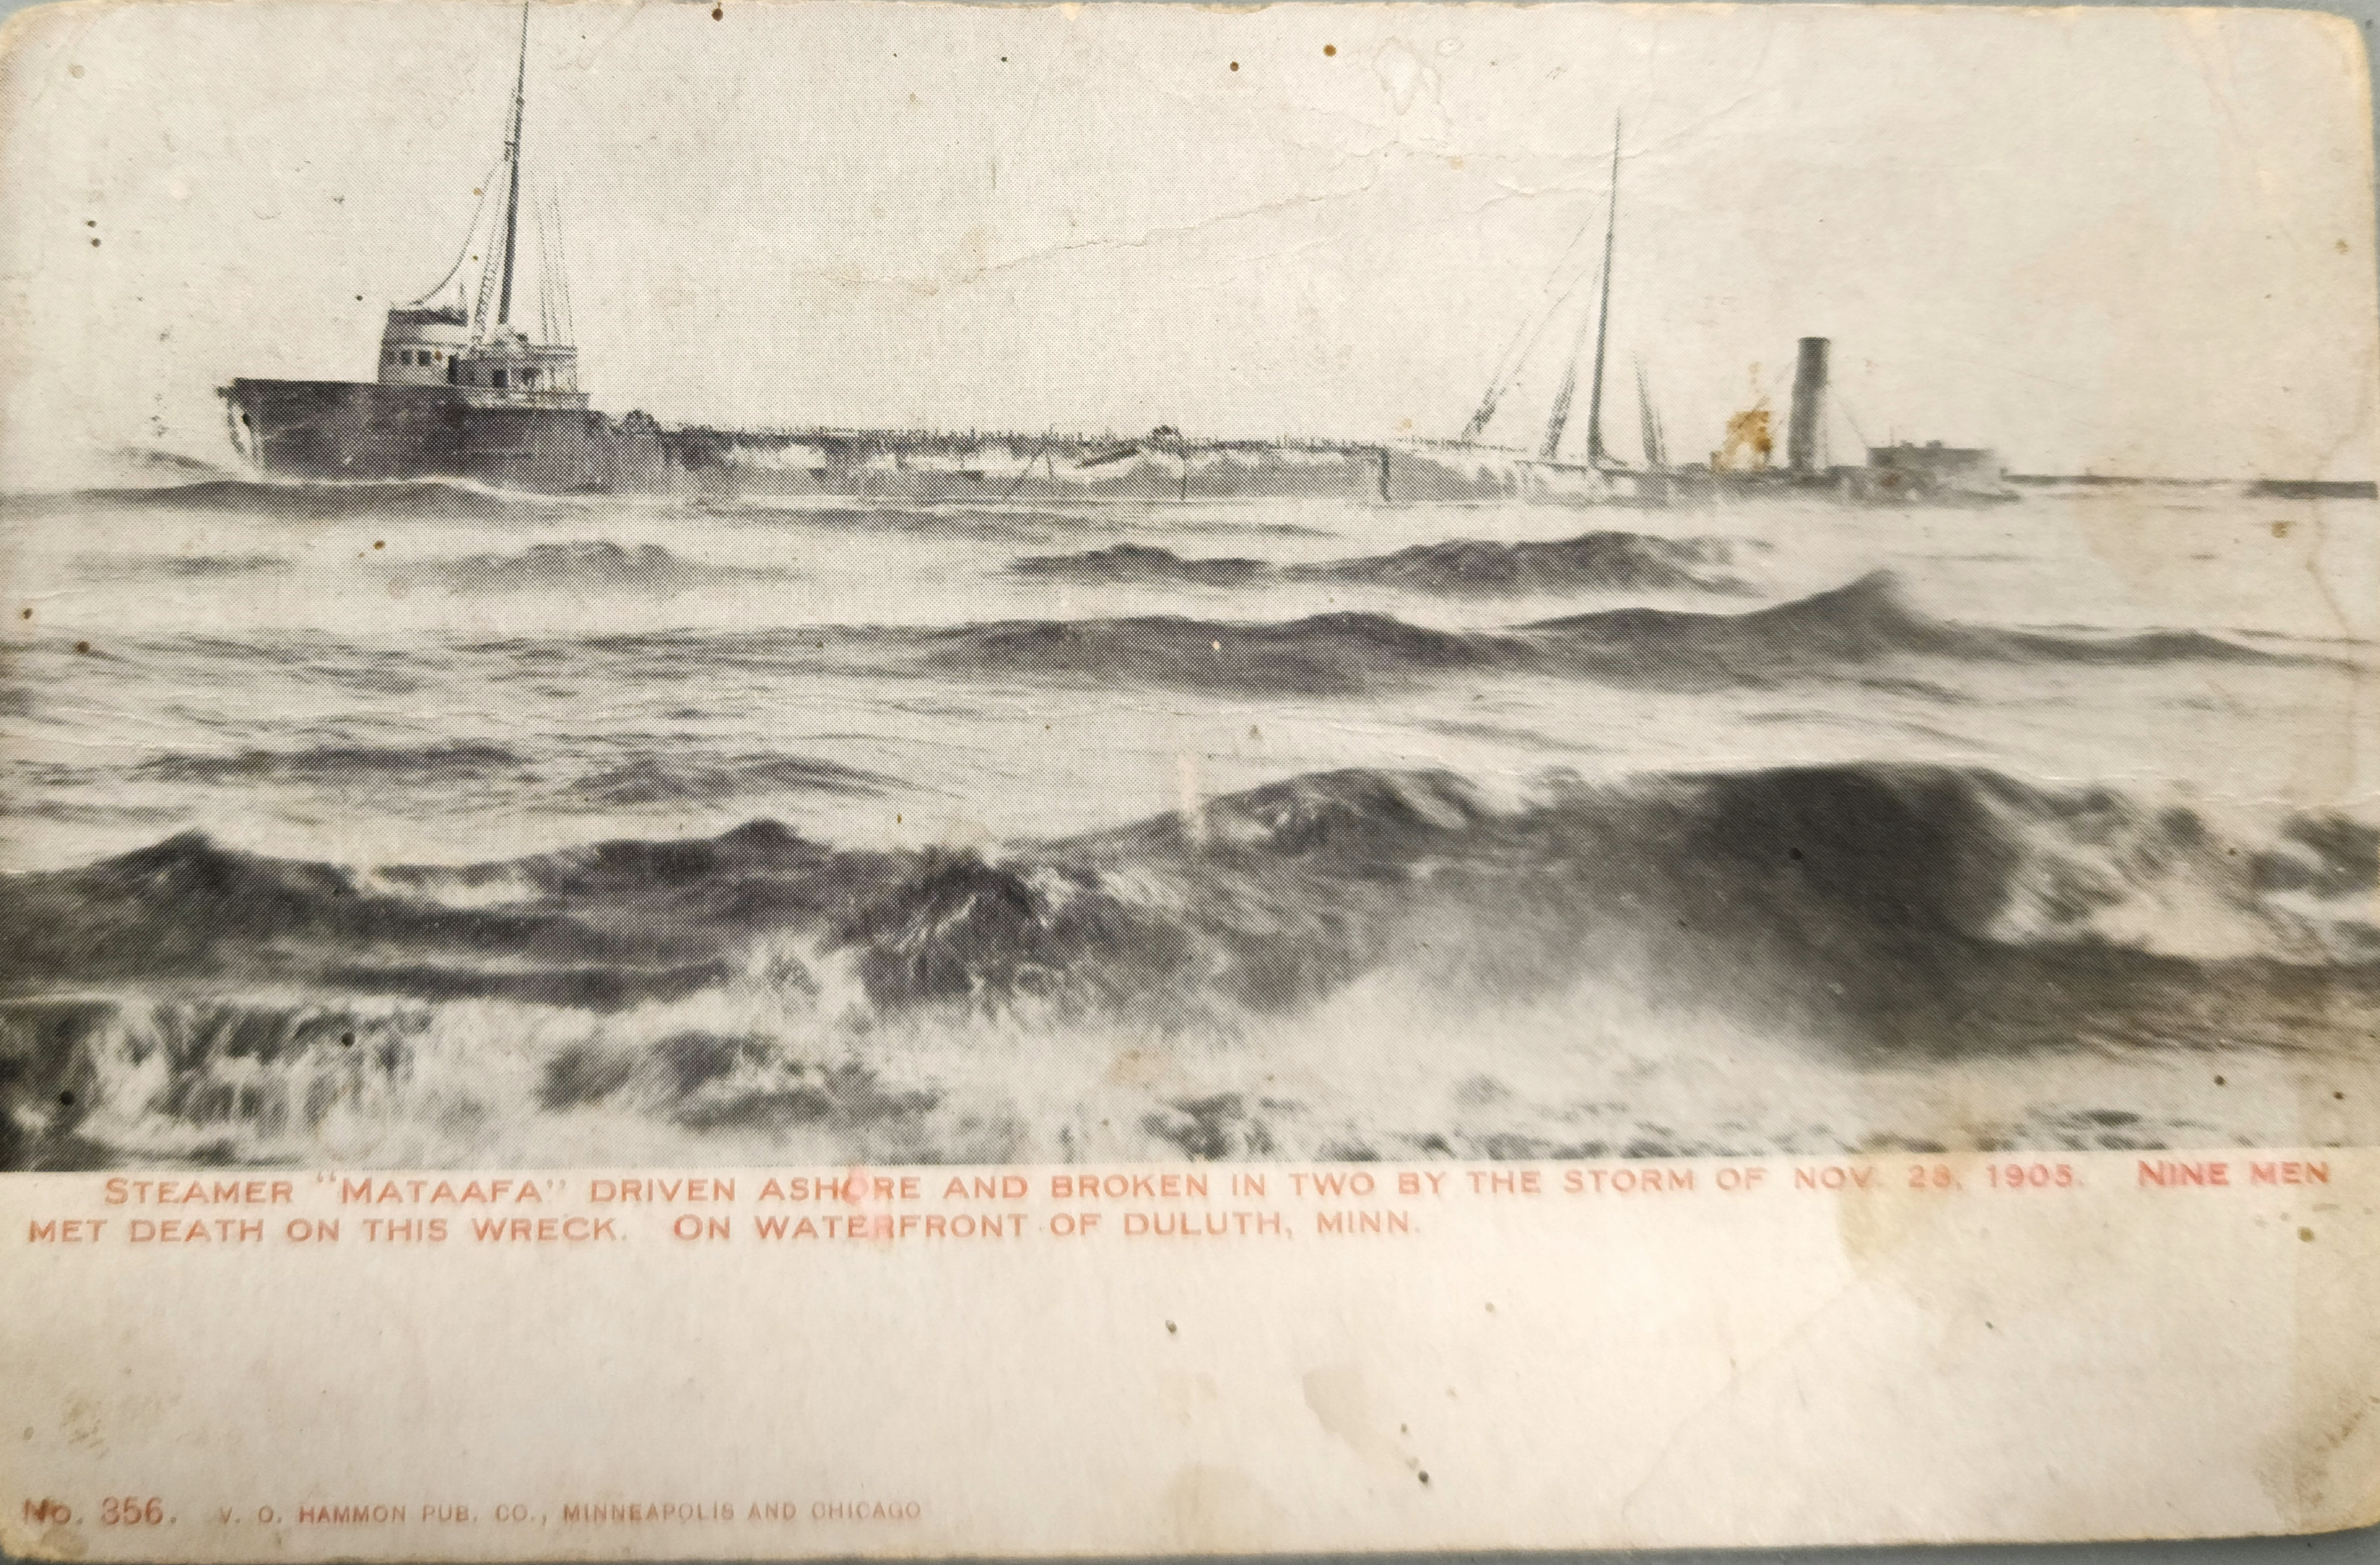 A postcard from the Sombra Museum Archival Collection depicting the steamship 'MATAAFA' after it was wrecked in a storm on November 28, 1905, near Duluth, Minnesota.